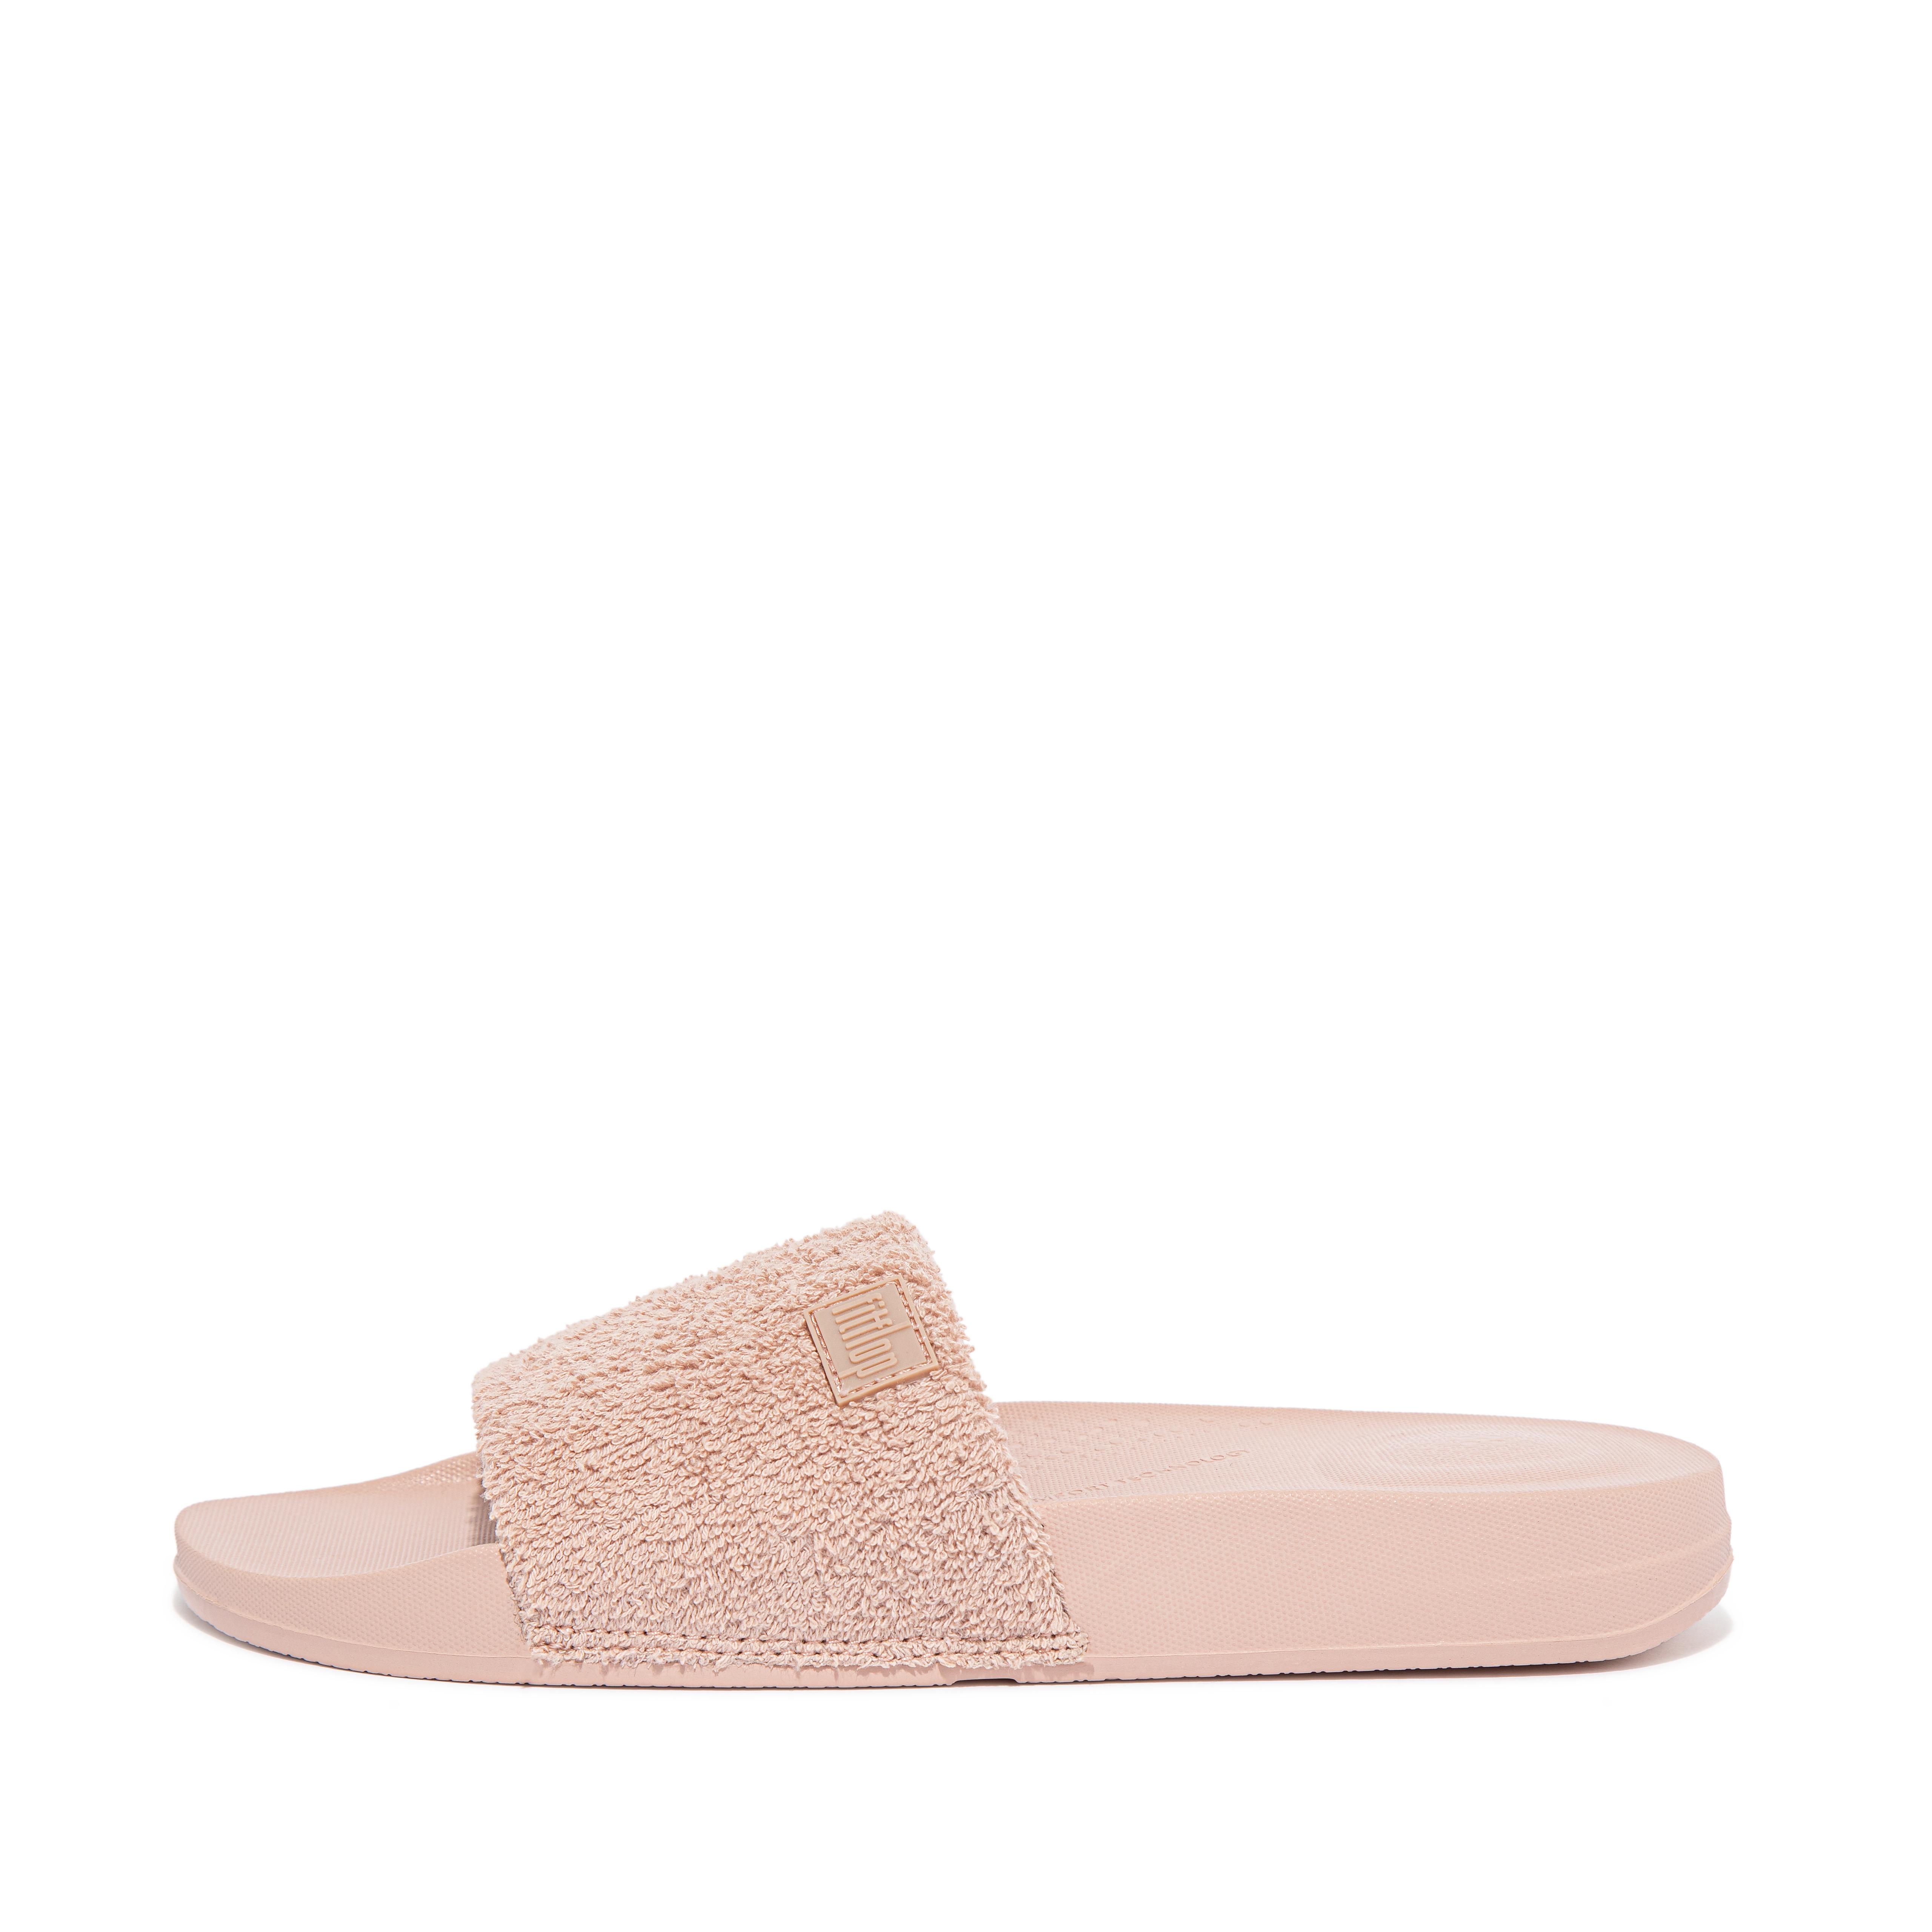 iQushion Towel Slides | FitFlop US